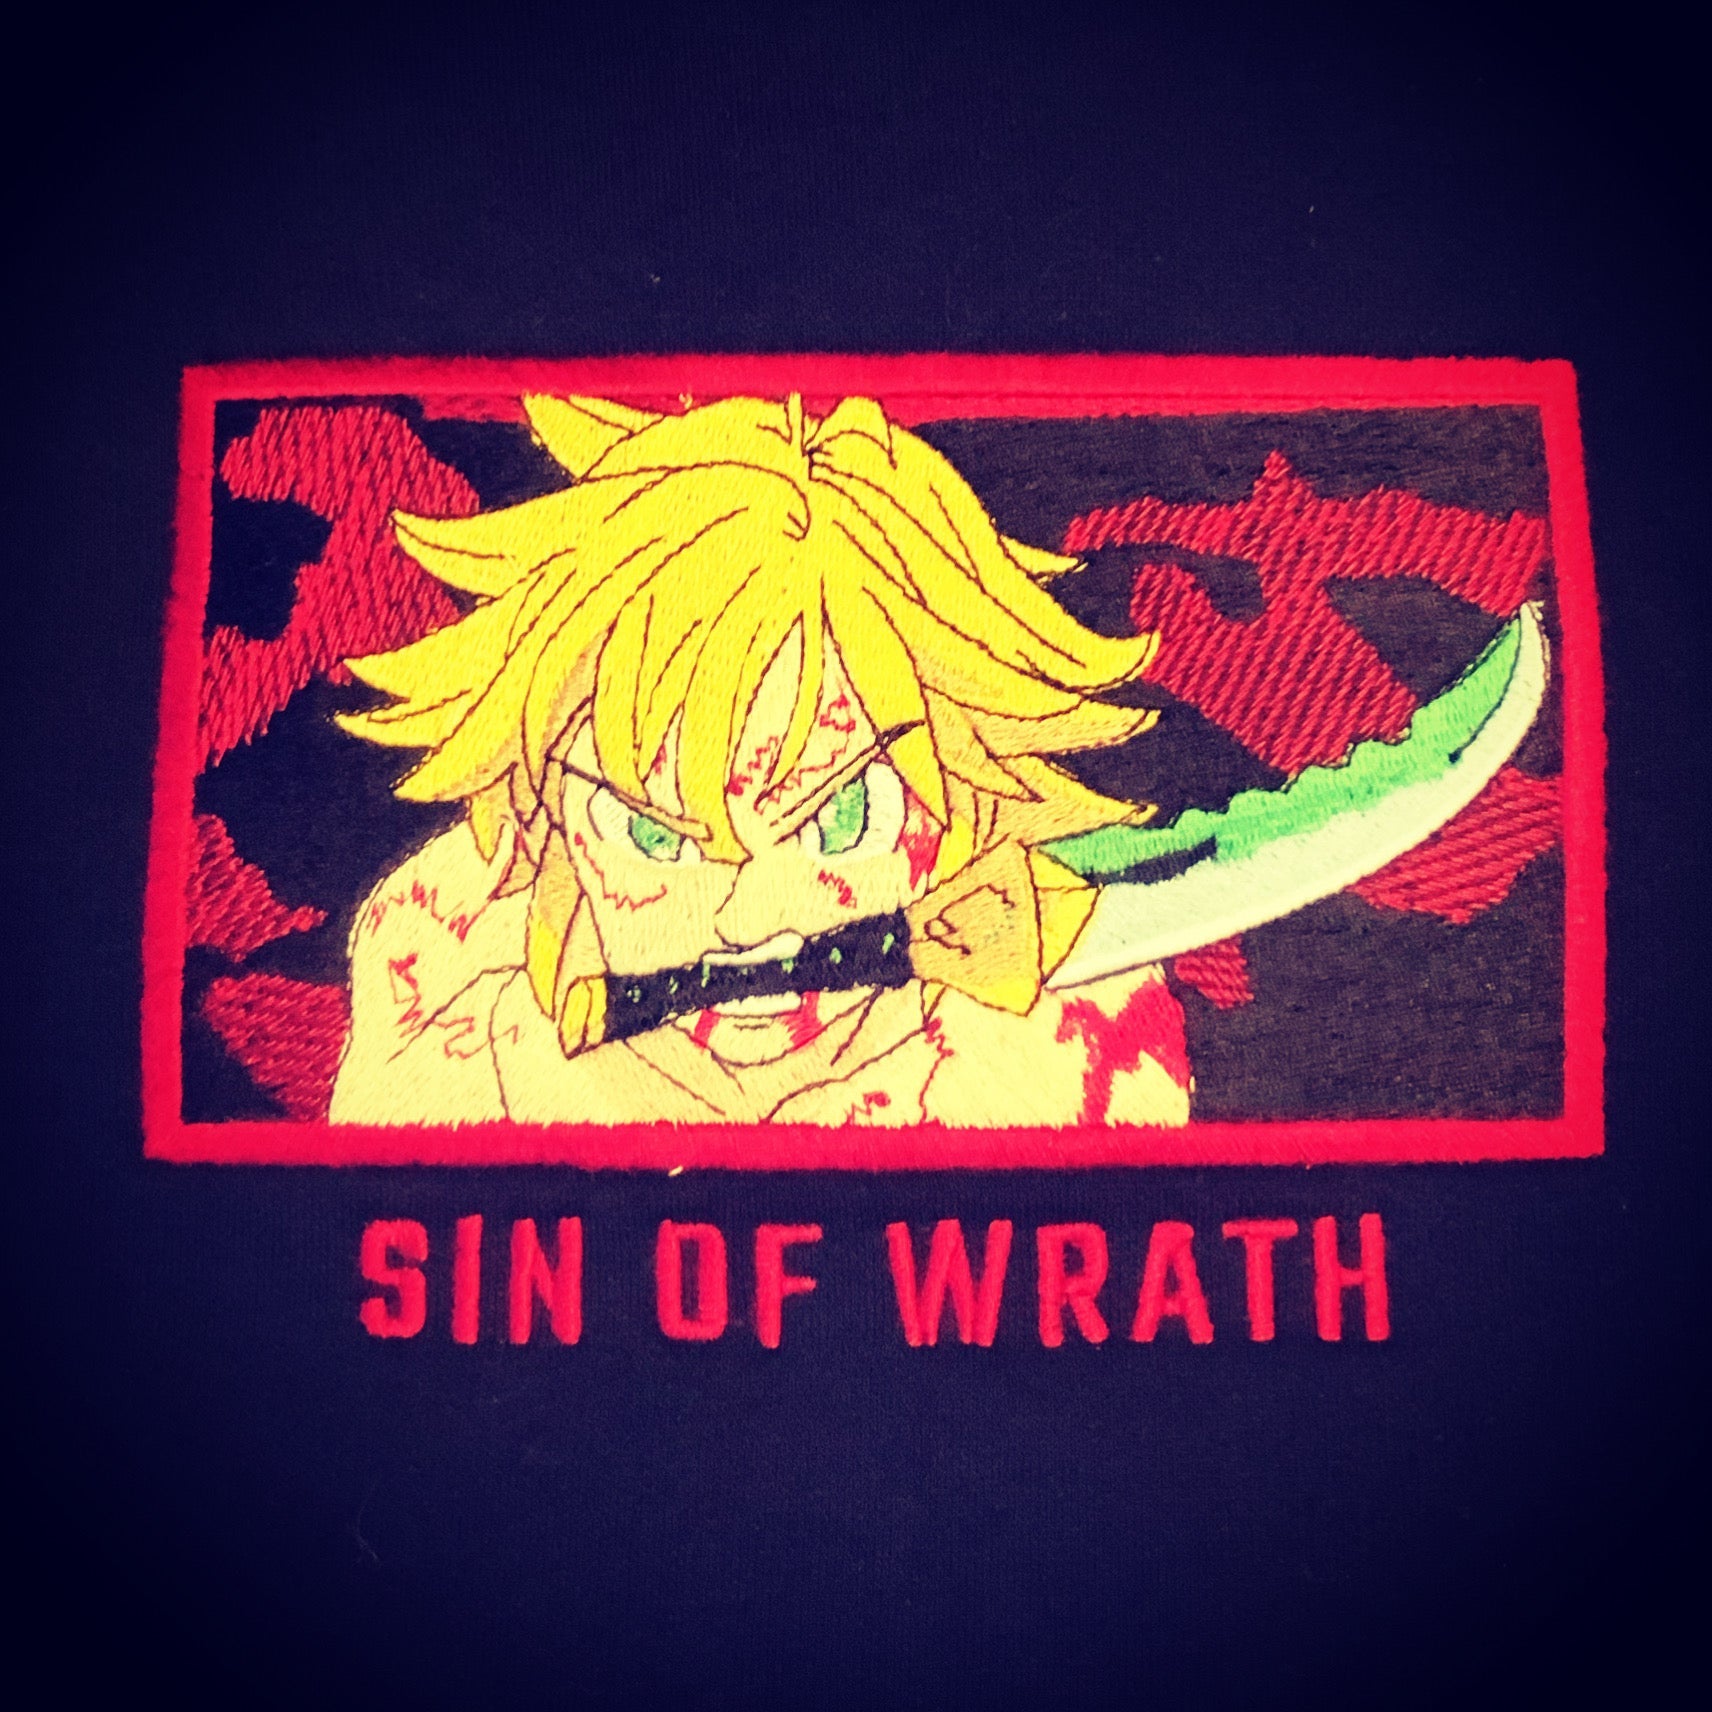 LIMITED SEVEN DEADLY SINS MELIODAS SIN OF WRAITH EMBROIDERED ANIME HOODIE